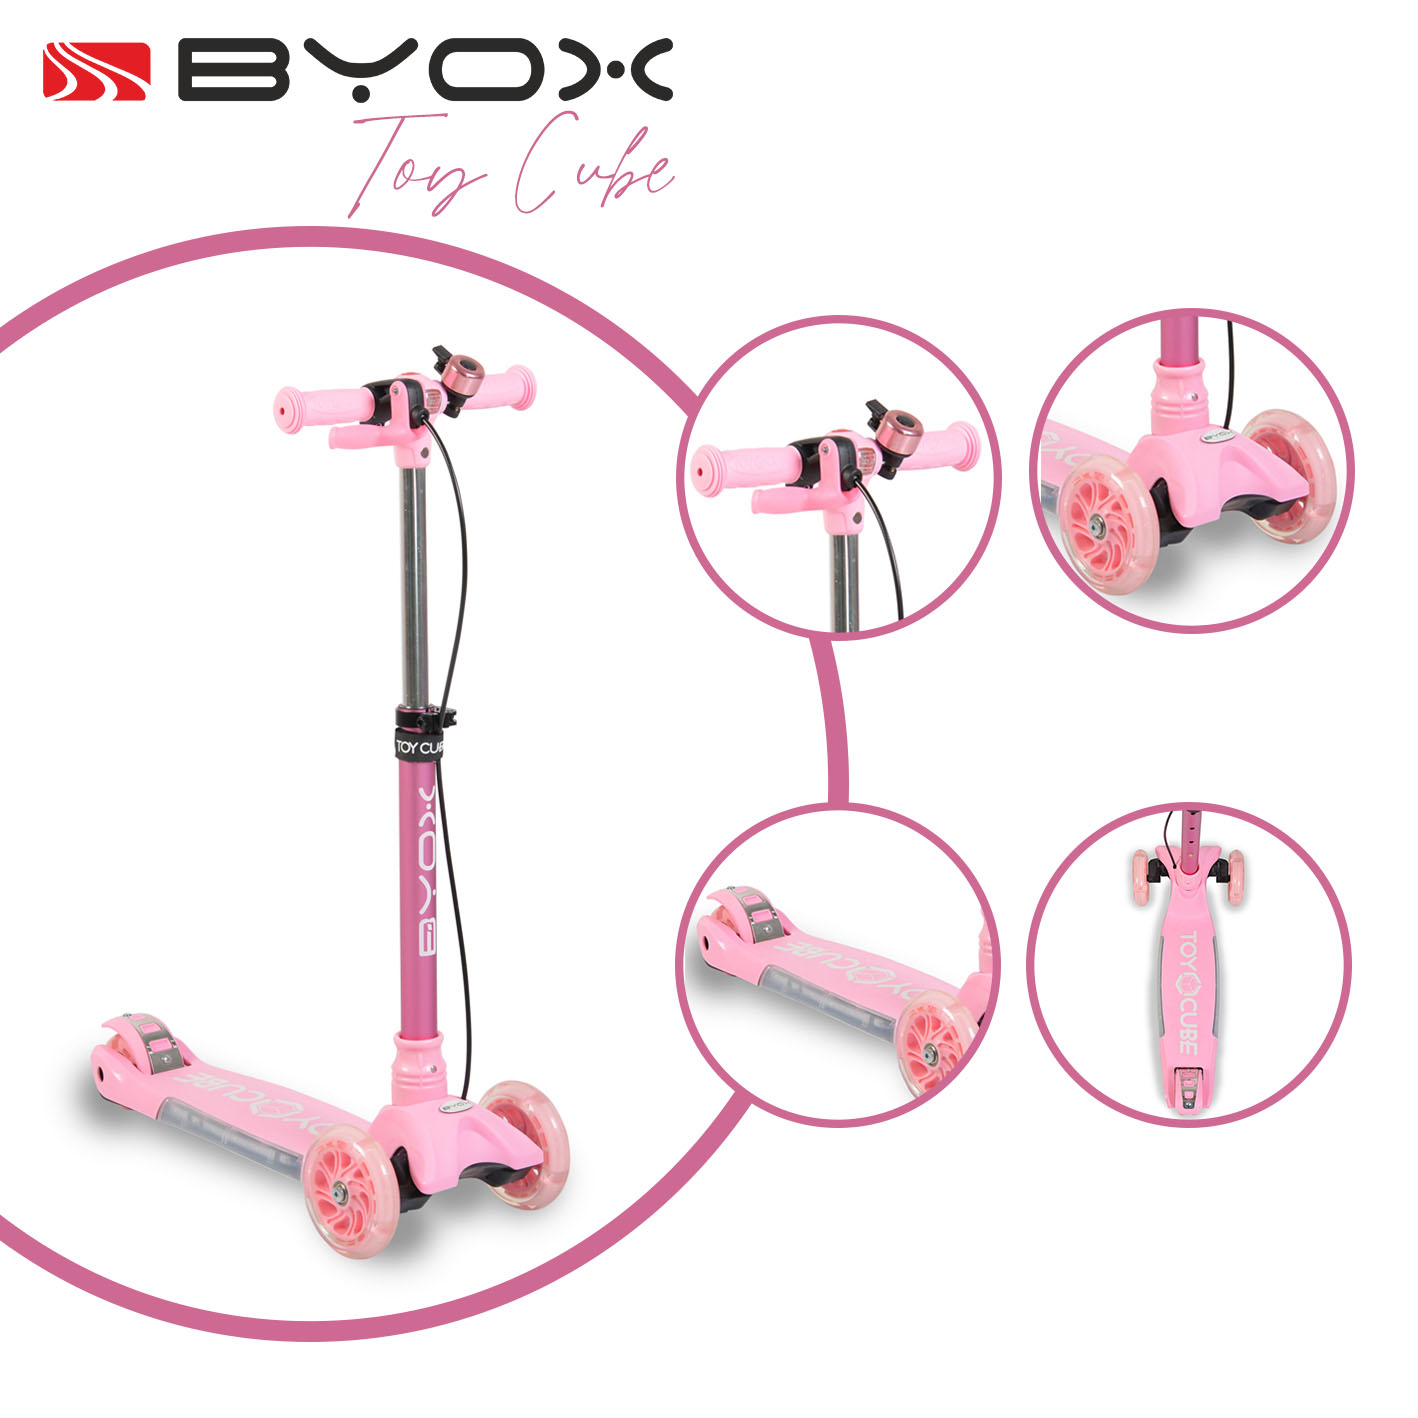 Byox Scooter Toy cube pink 3800146225544